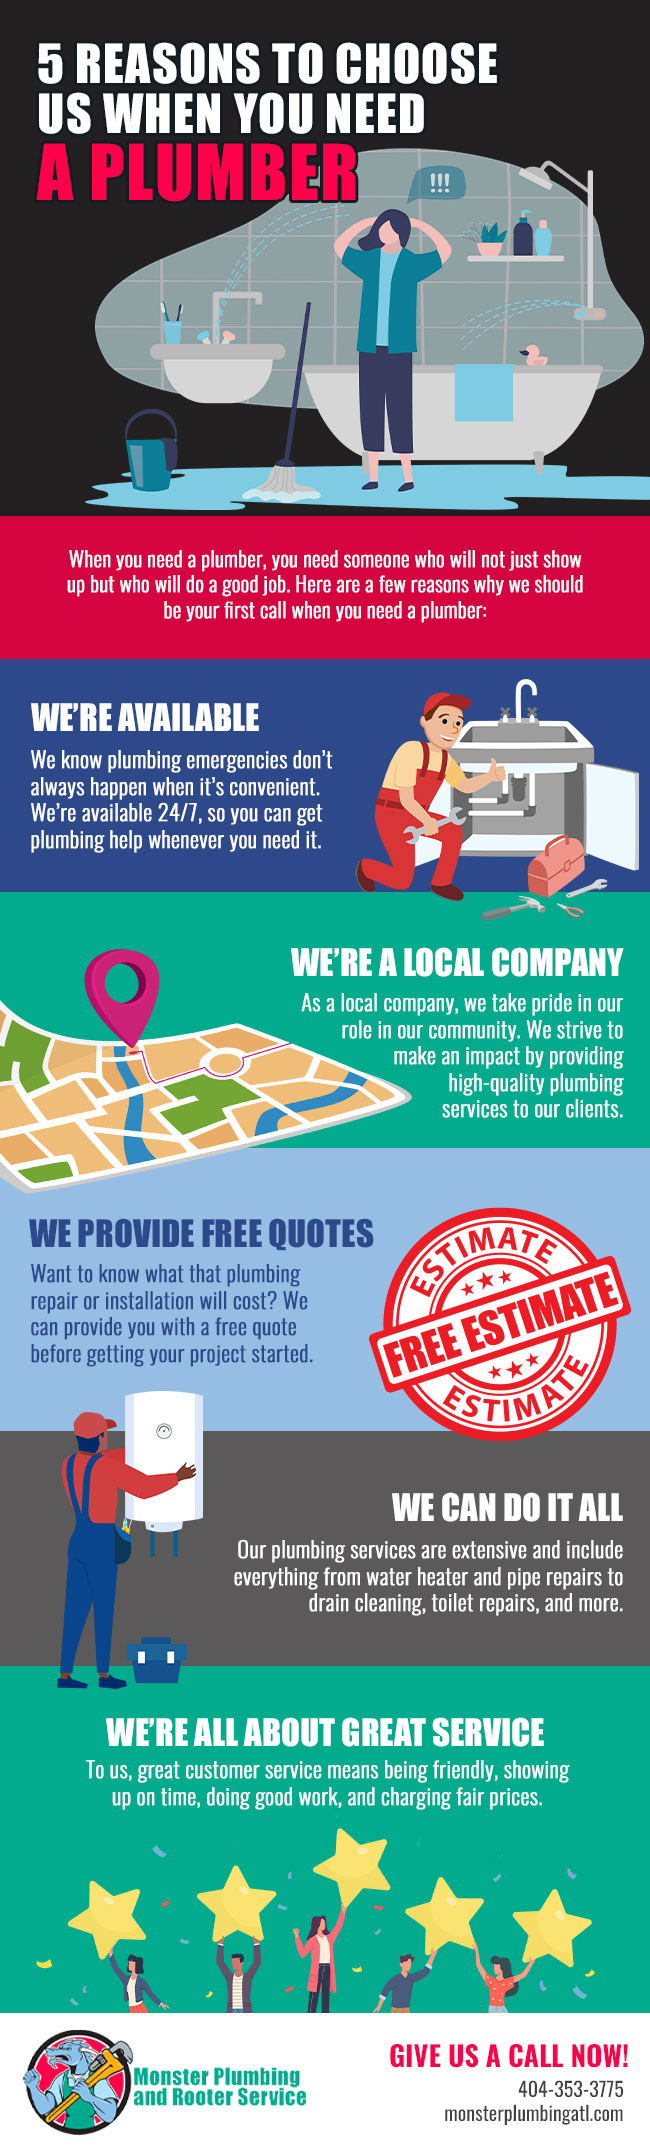 5 Reasons to Choose Us When You Need a Plumber 